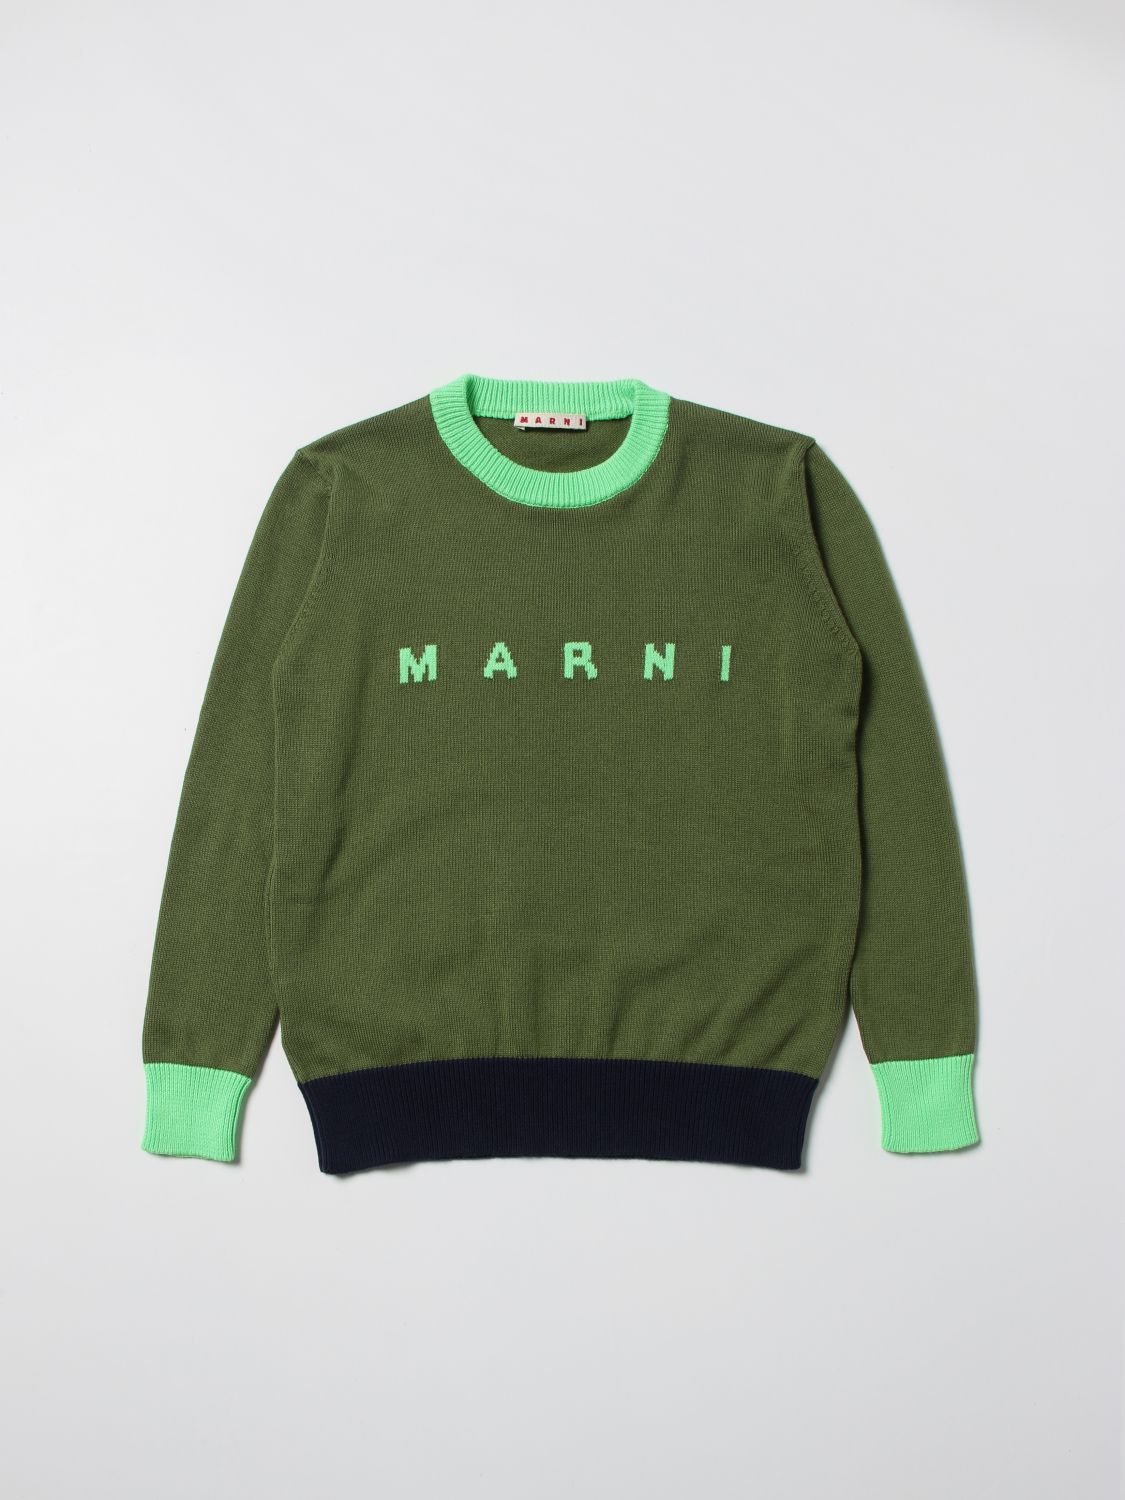 Marni Kids Spring Summer 2022 new collection 2022 online on GIGLIO.COM